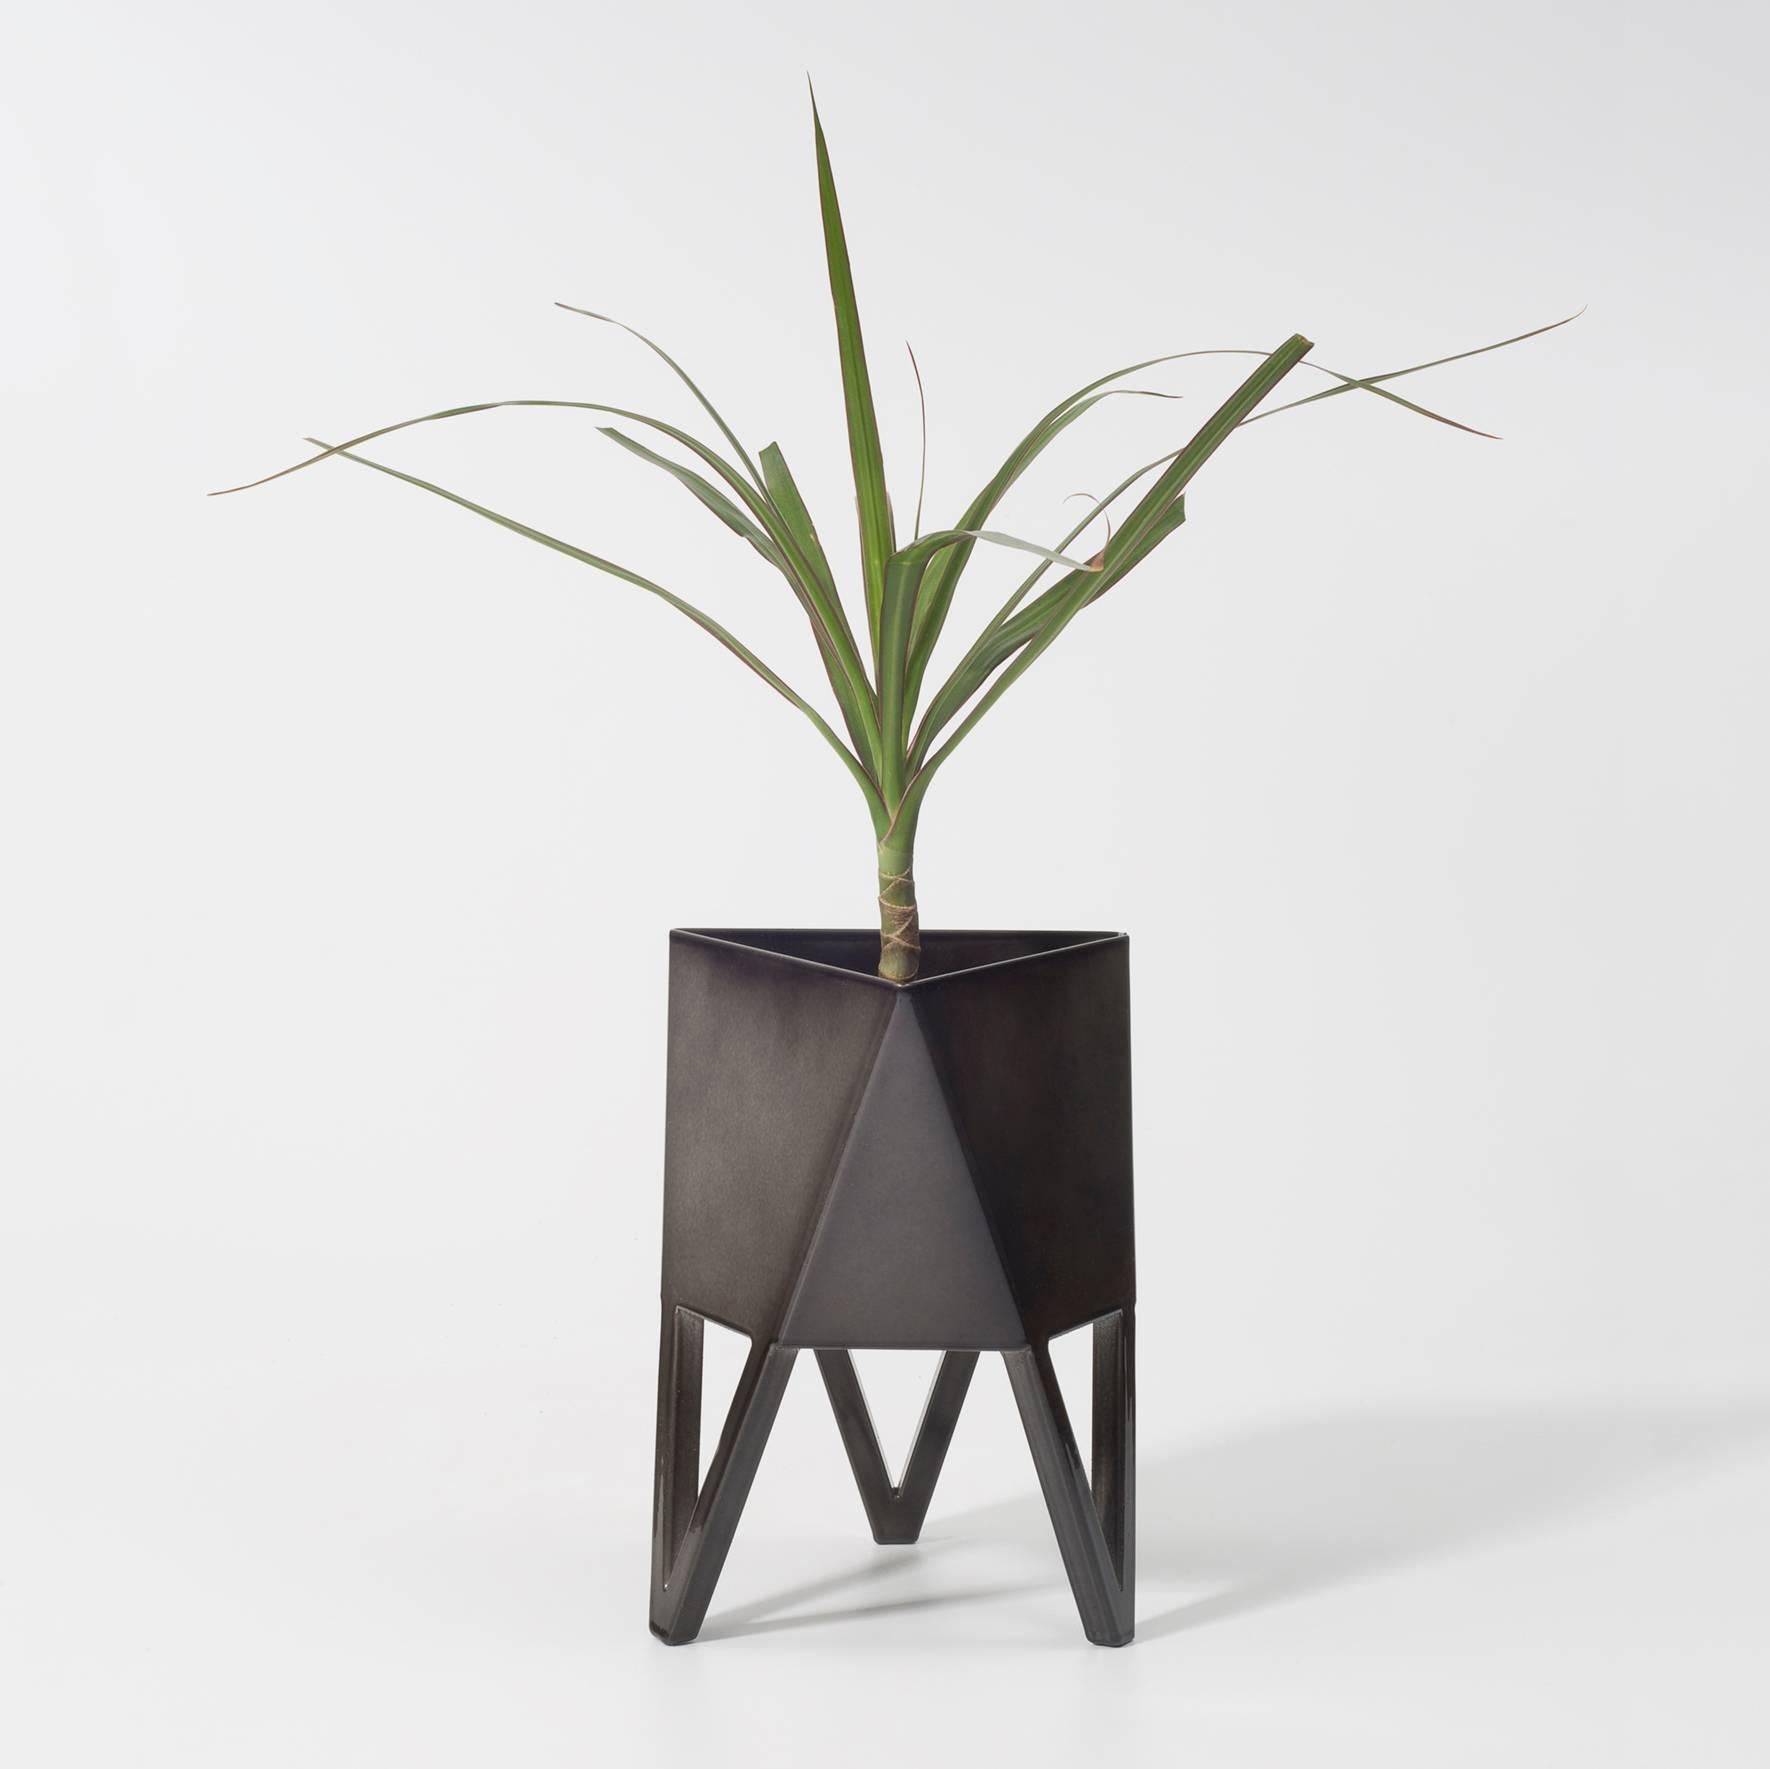 Deca Planter in Pastel Green Steel, Mini, by Force/Collide 6